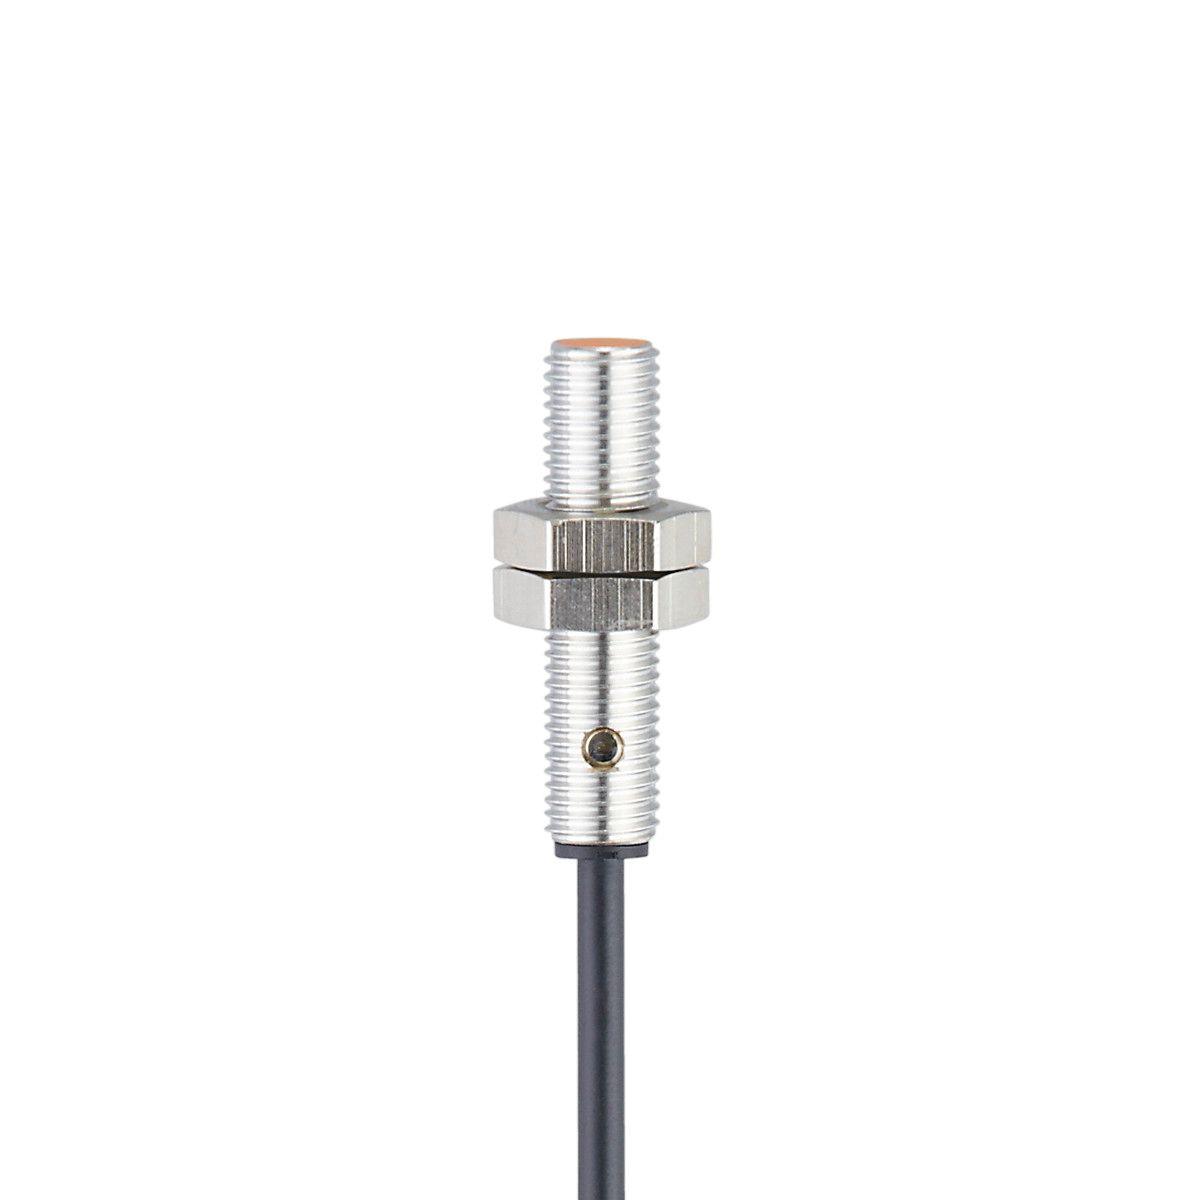 ifm Electronic IE5075 Inductive sensor, Electrical design: PNP, Output function: normally open, Sensing range [mm]: 1, Housing: Threaded type, Dimensions [mm]: M8 x 1 / L = 35